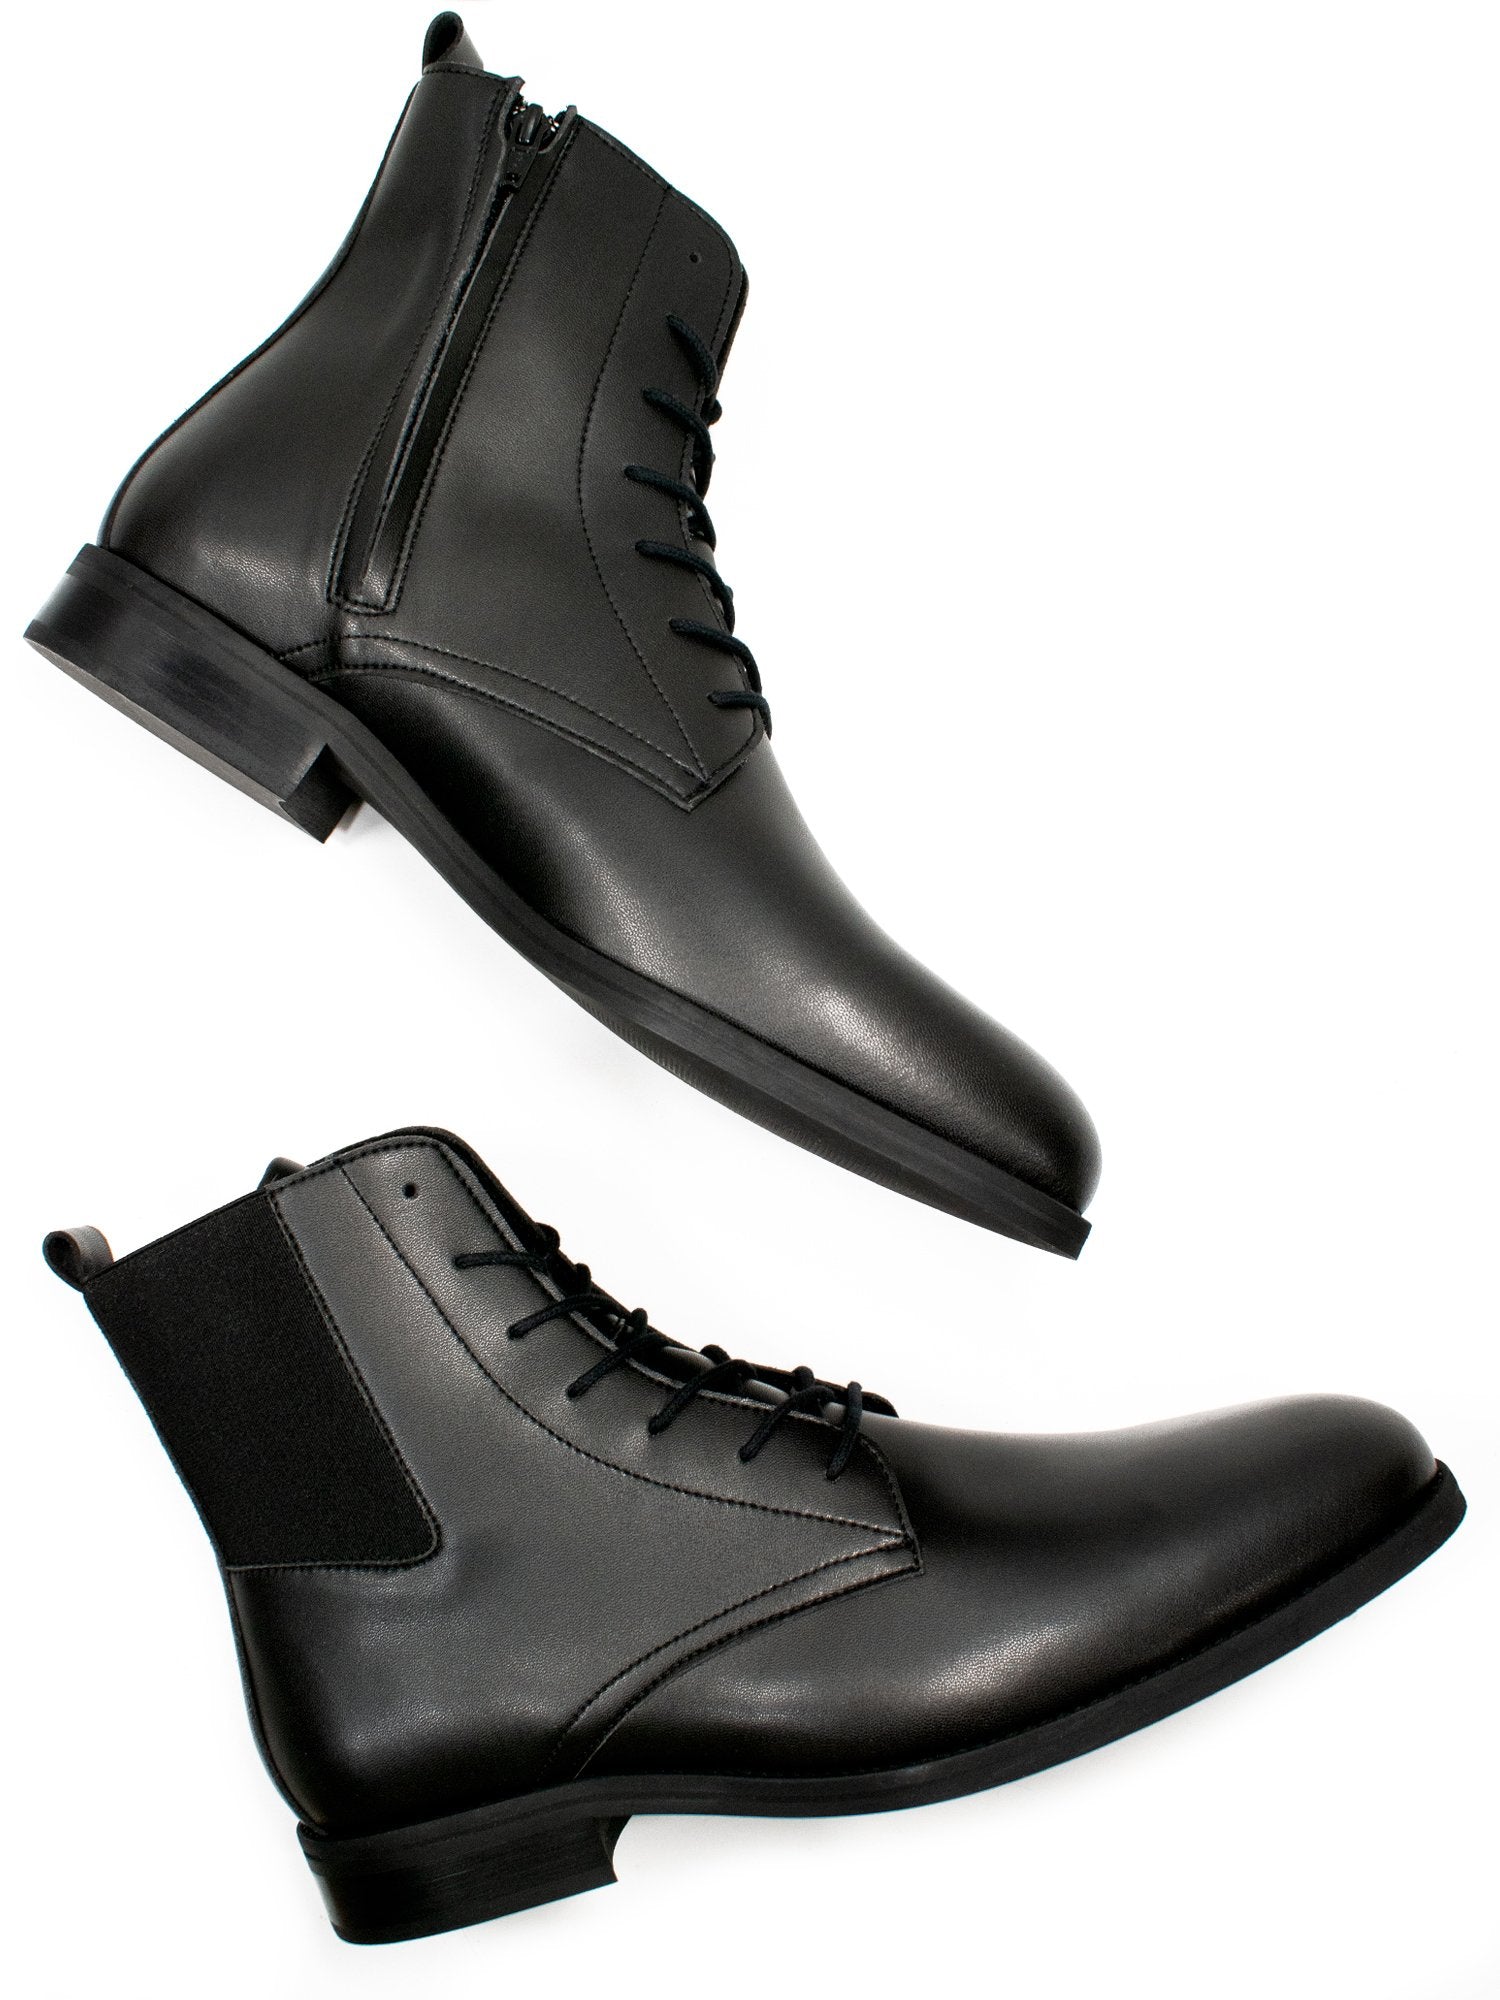 mens leather dress boots